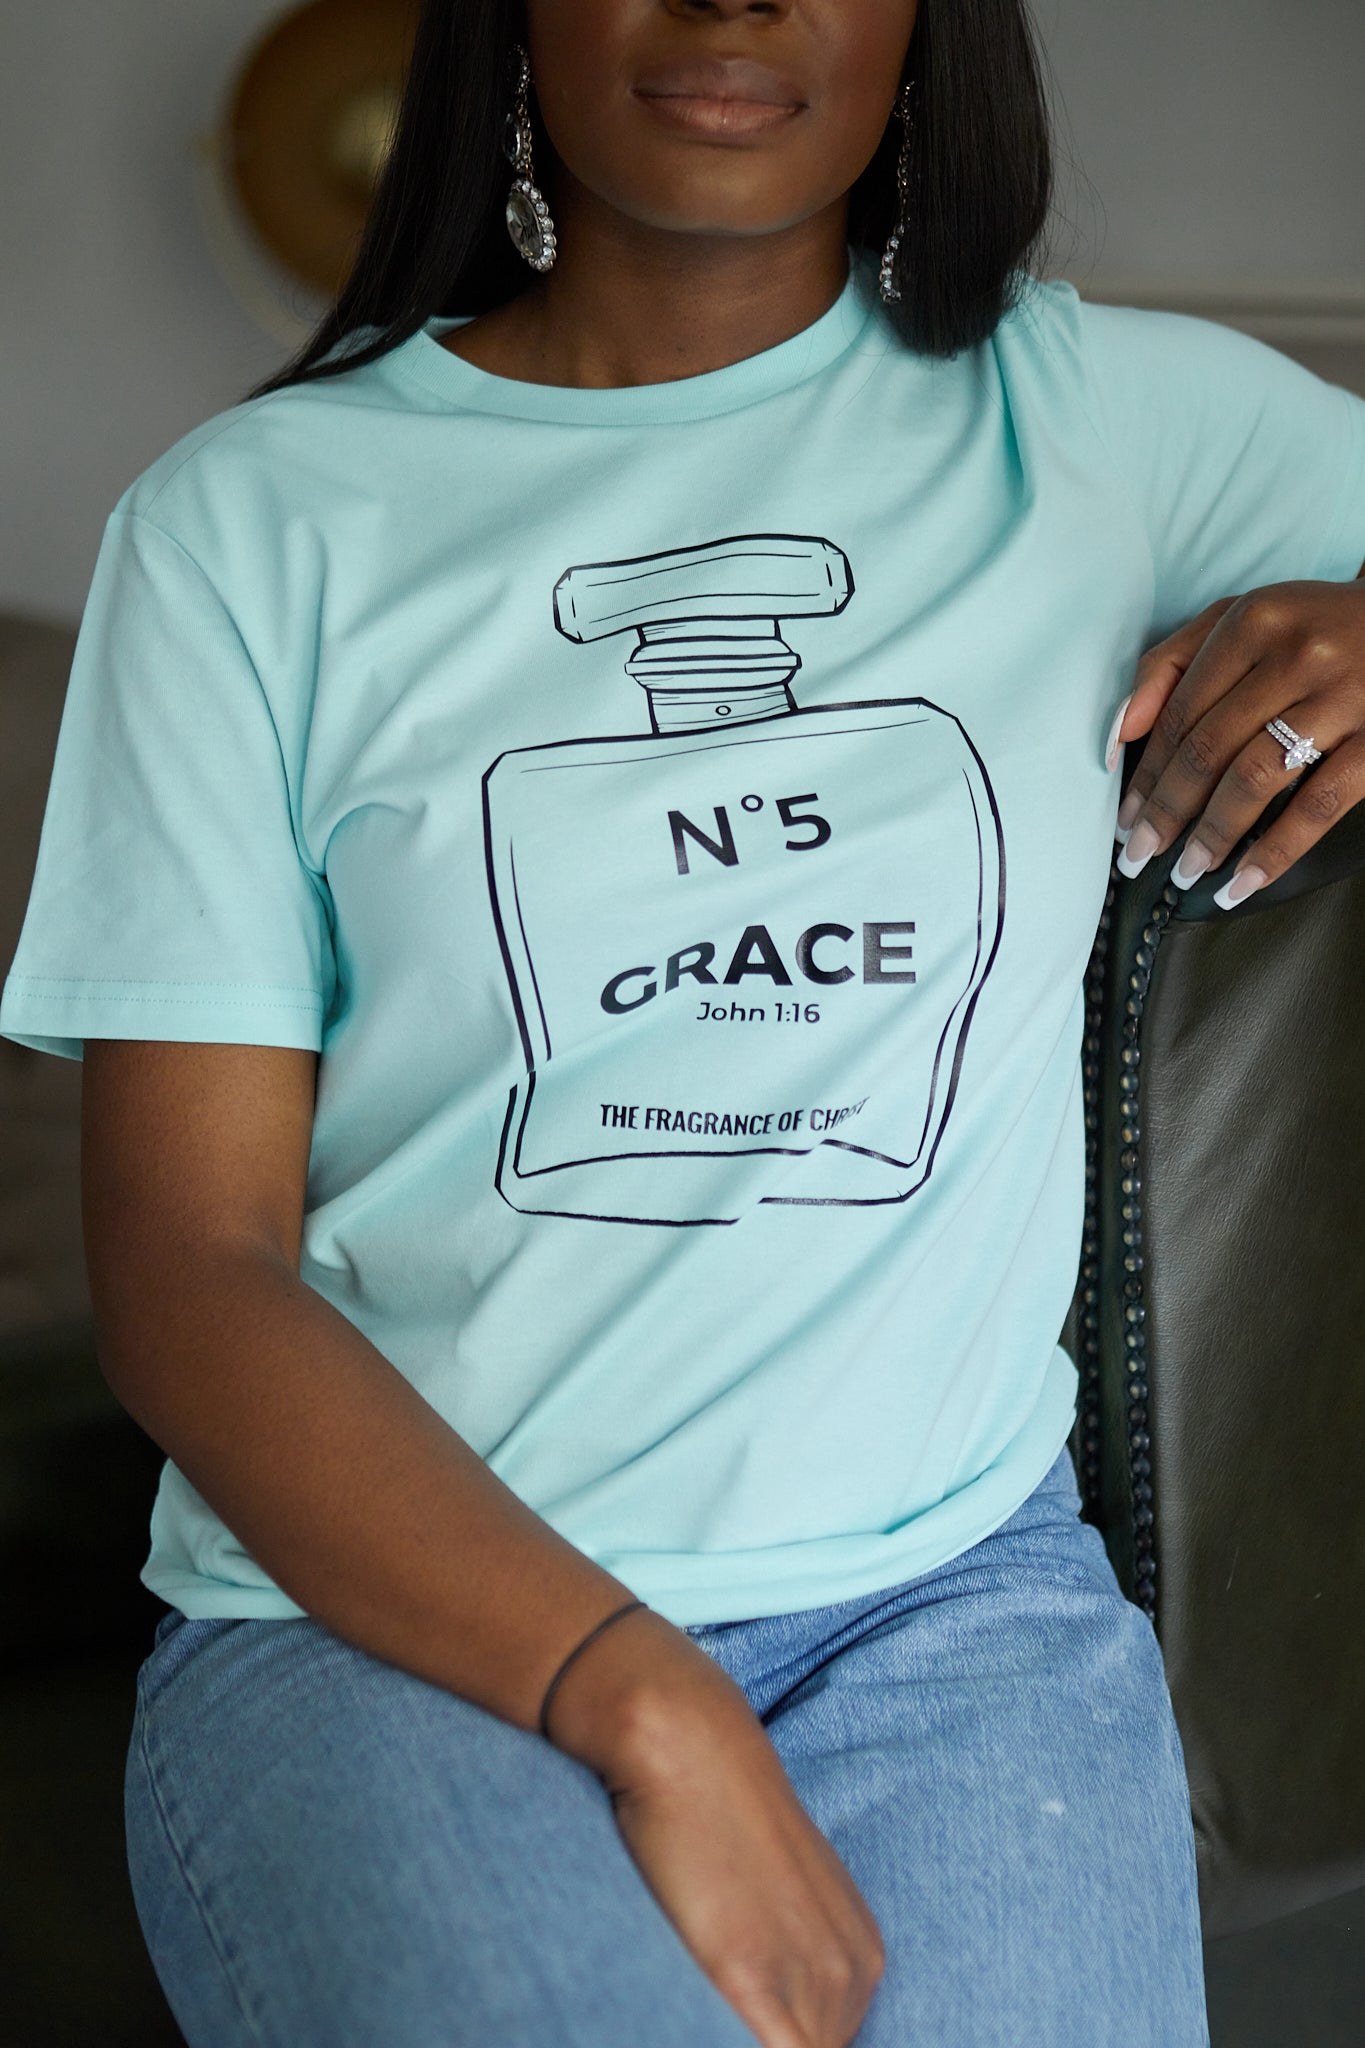 The smell of His Grace T-shirt